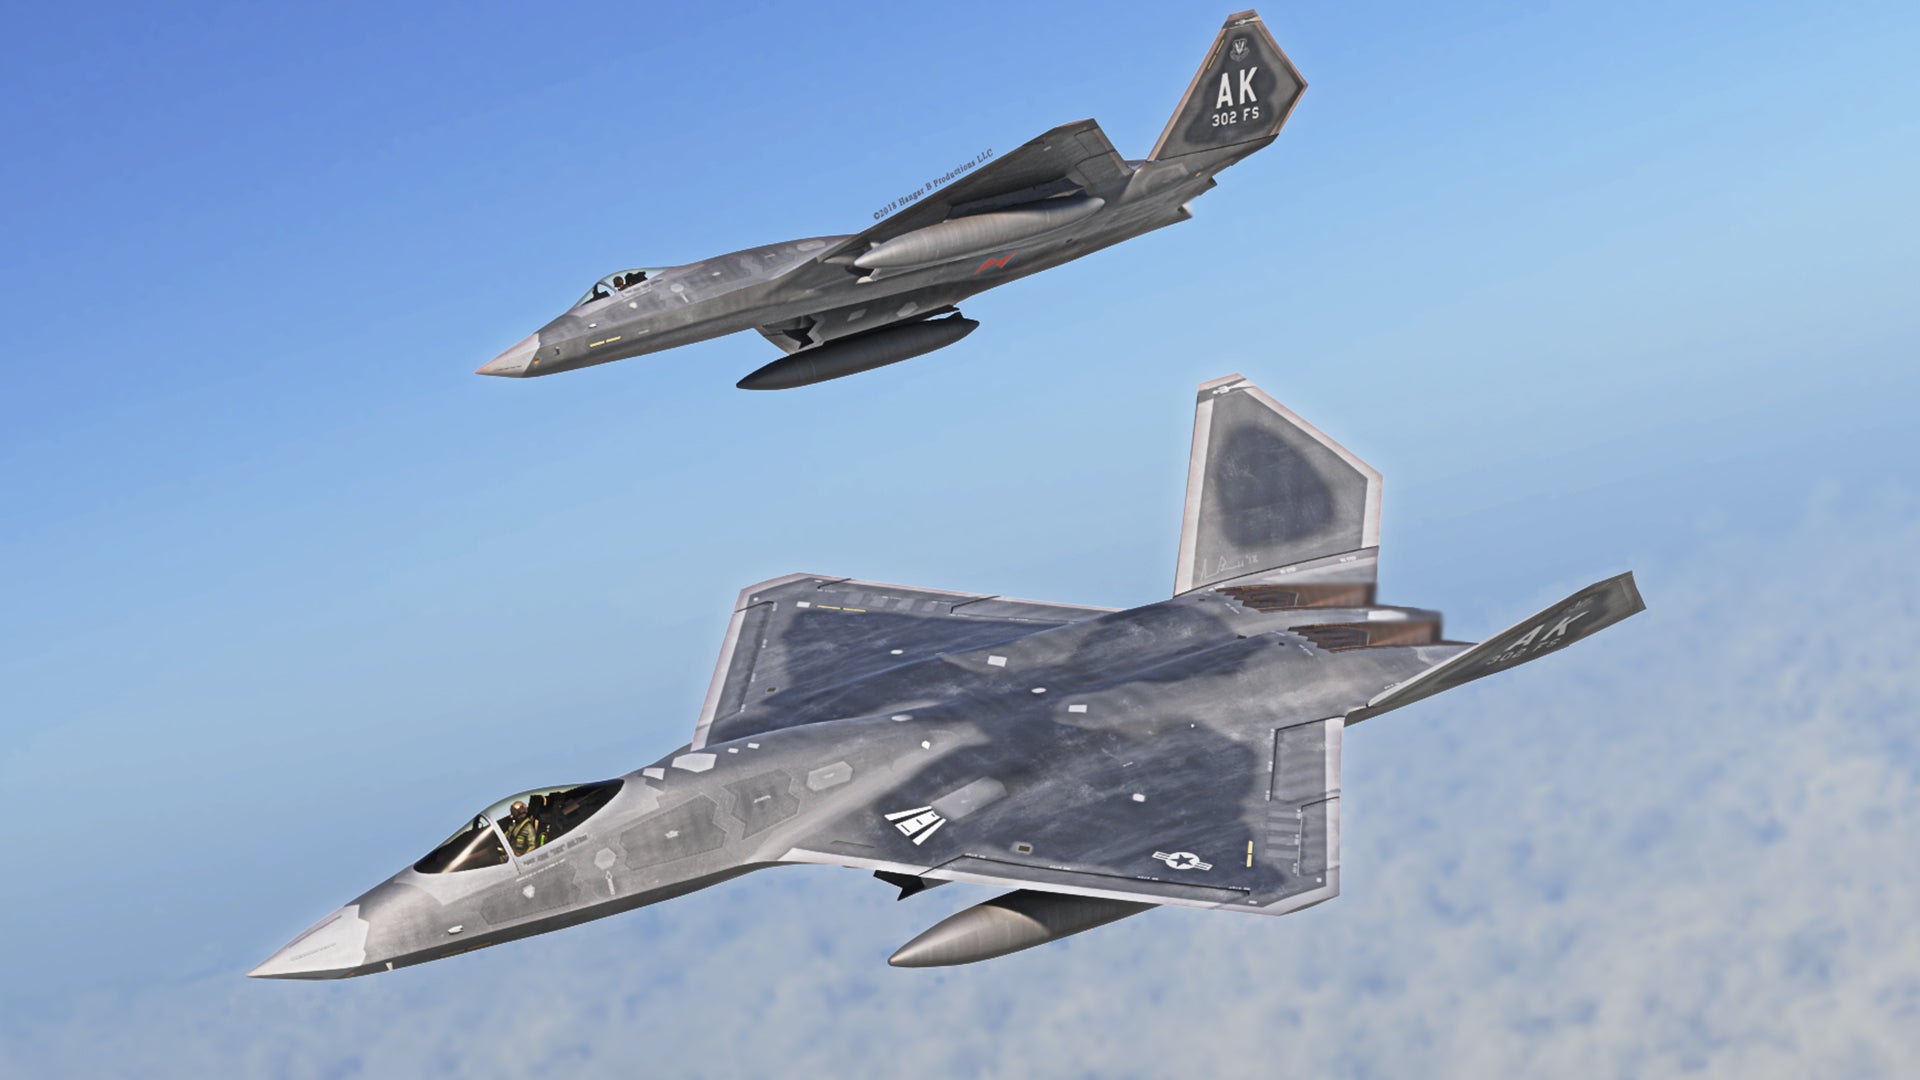 The world is in awe of the new American superfighter plane.